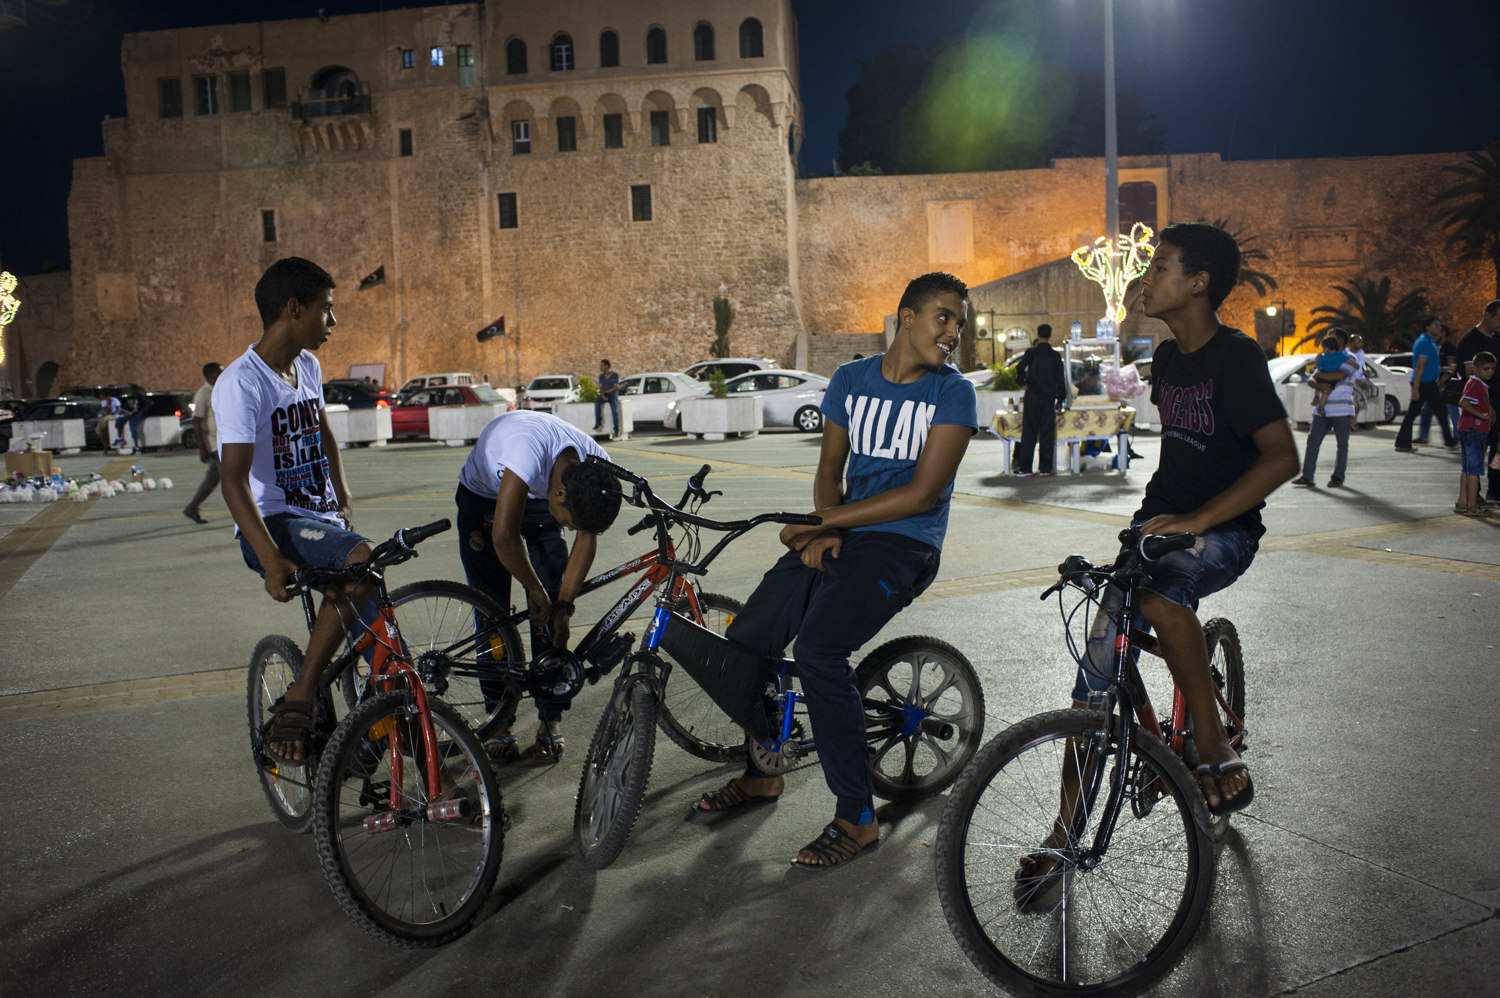  Young boys on bikes in Martyr Square in Tripoli, Libya. 42 years after the reign of Col. Muammar Gaddafi and a violent civil war Libya is waking up to a new and free country. With civil services and the countries infrastructure in ruins Libyans stru